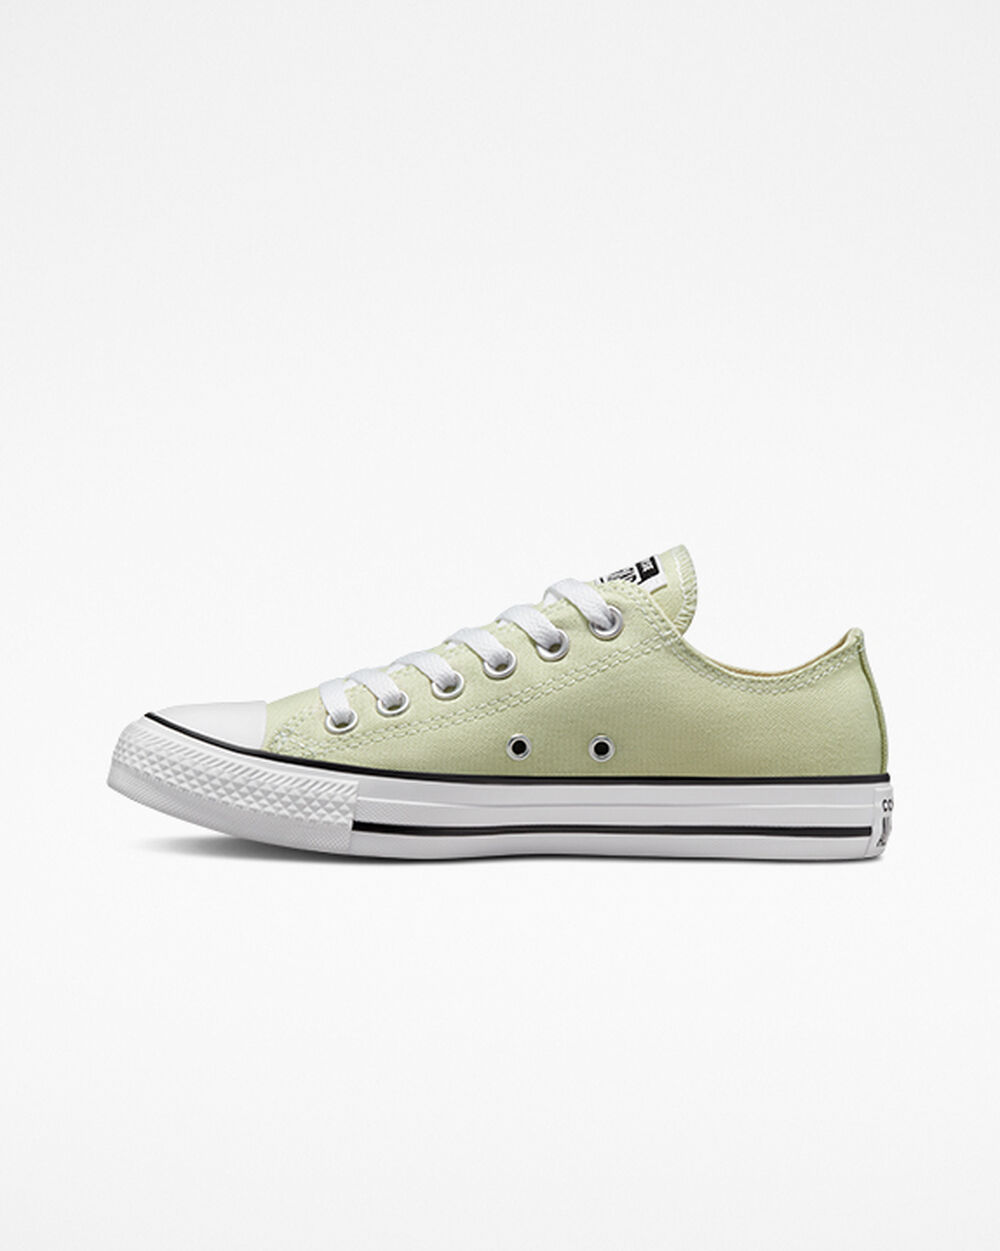 Tenis Converse Chuck Taylor All Star Mujer Verdes Blancos | Mexico-126676